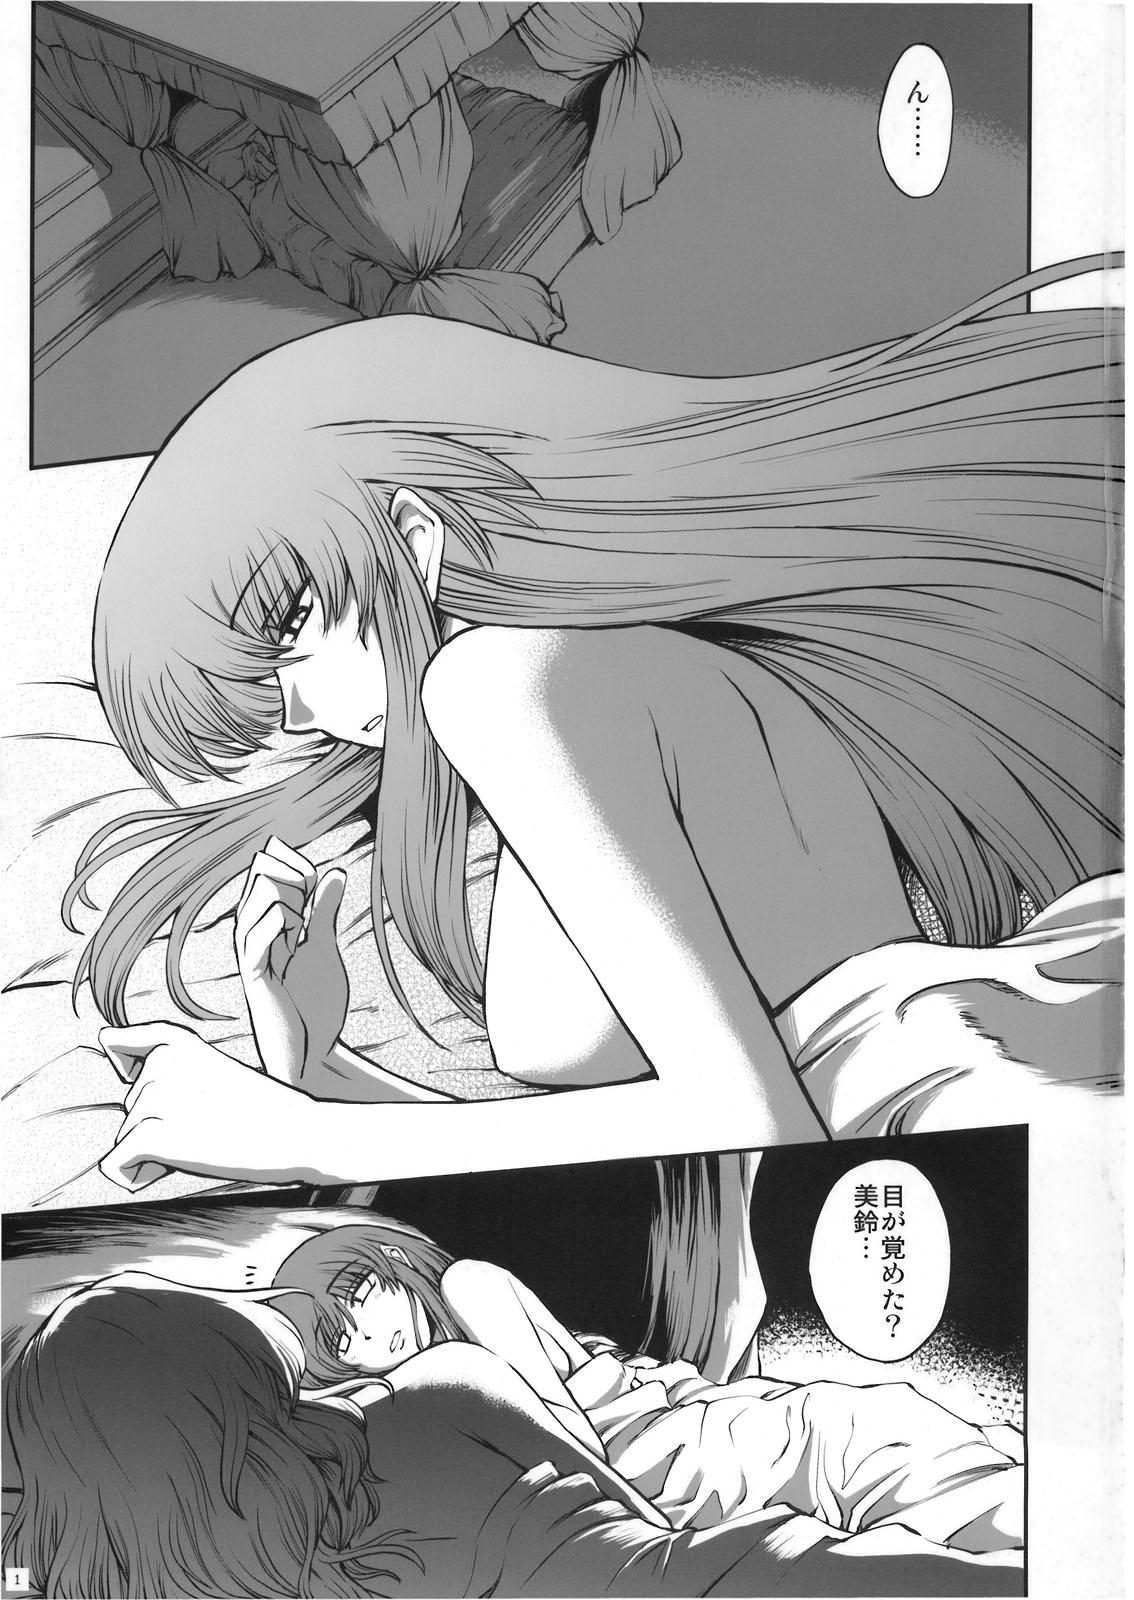 Pussy To Mouth Luna Dial Maid to Chi no Unmei dokei Lunatic+alpha - Touhou project Gay Facial - Page 2